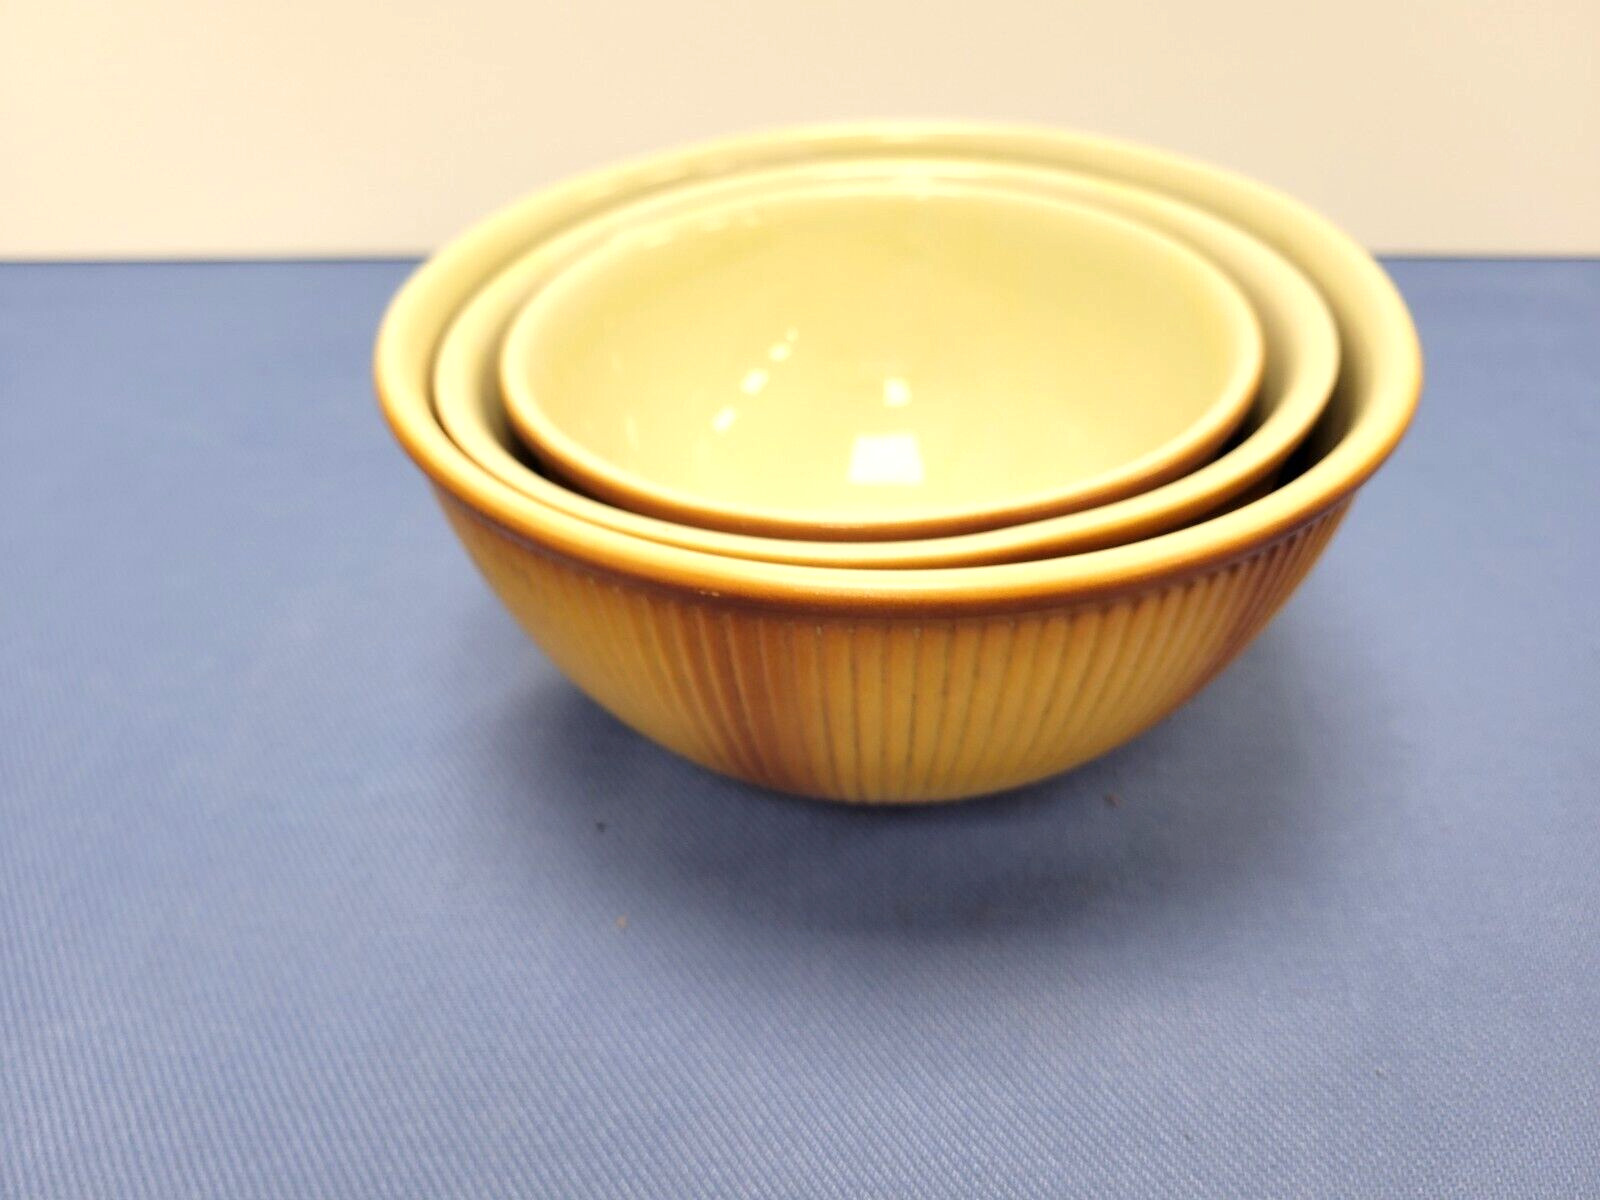 Unusual Vintage Hall Nesting Mixing Bowls 1930s Russetware Ribbed 3 piece Set